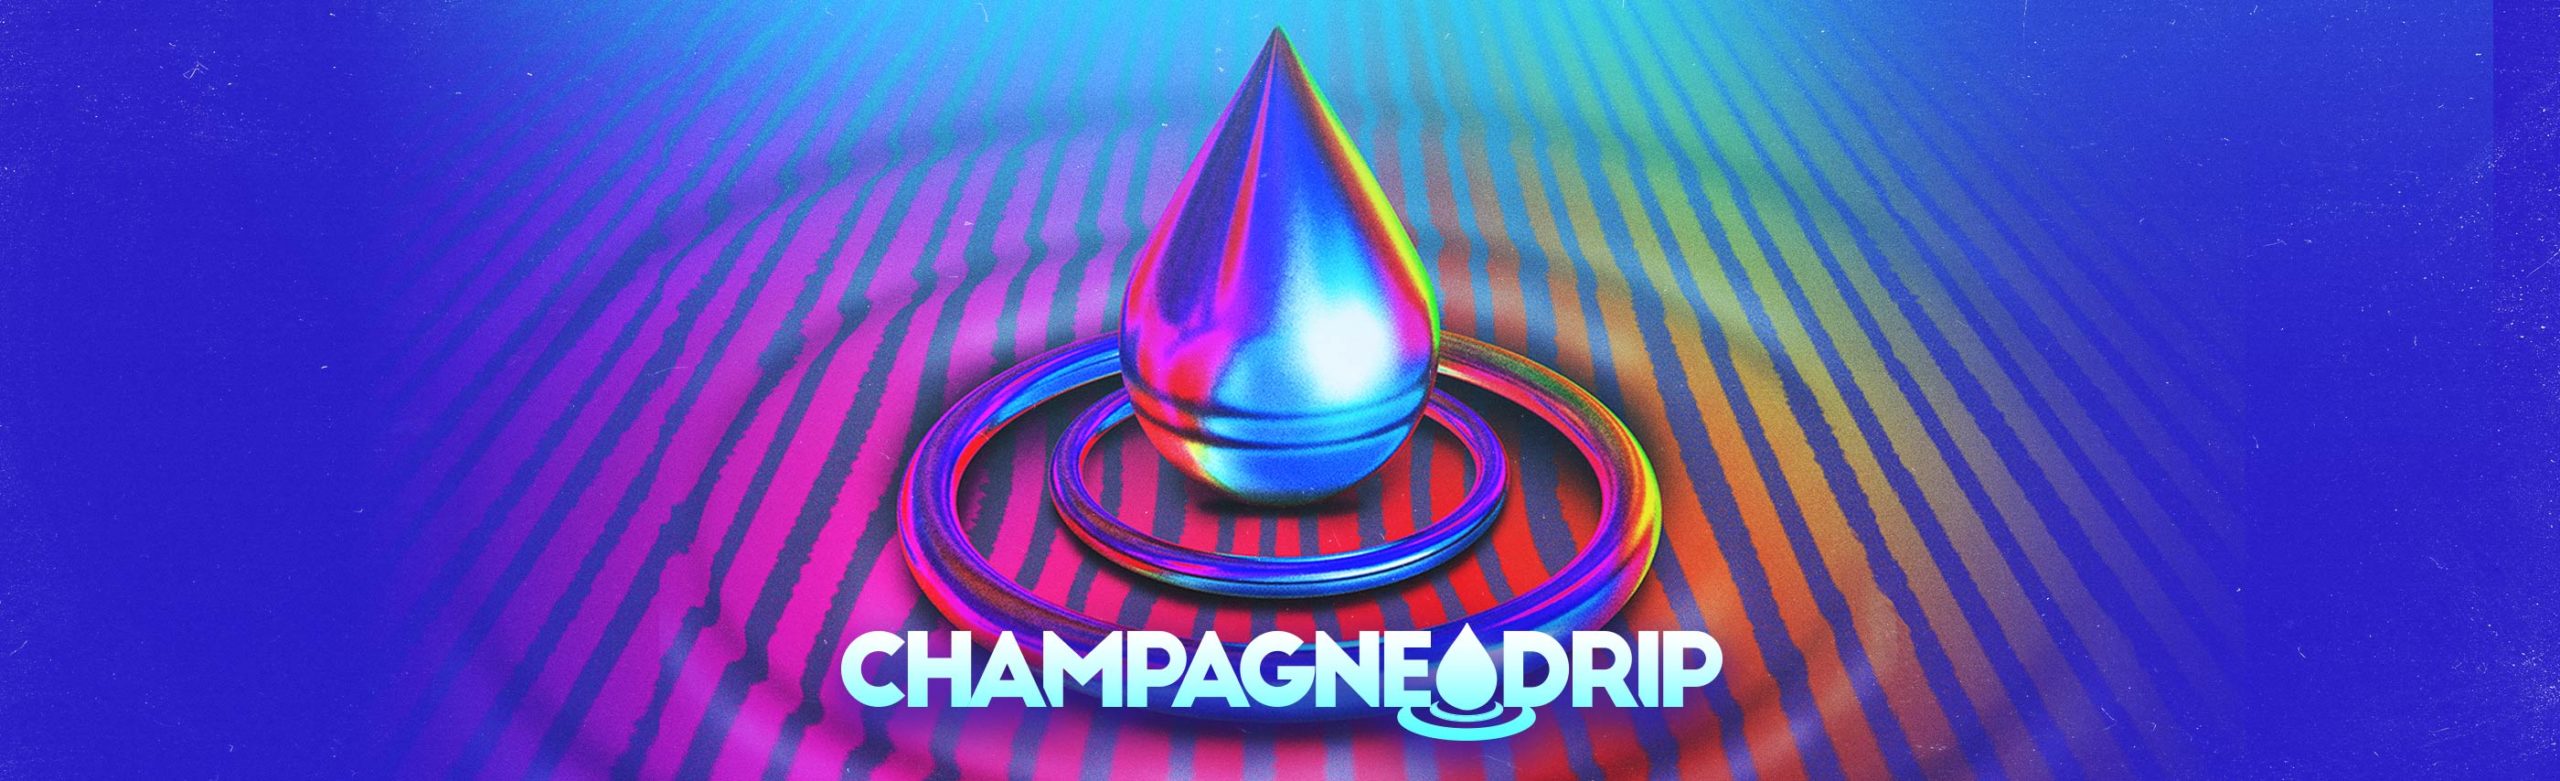 Time Warp Tour ft. Champagne Drip Announced in Bozeman Image